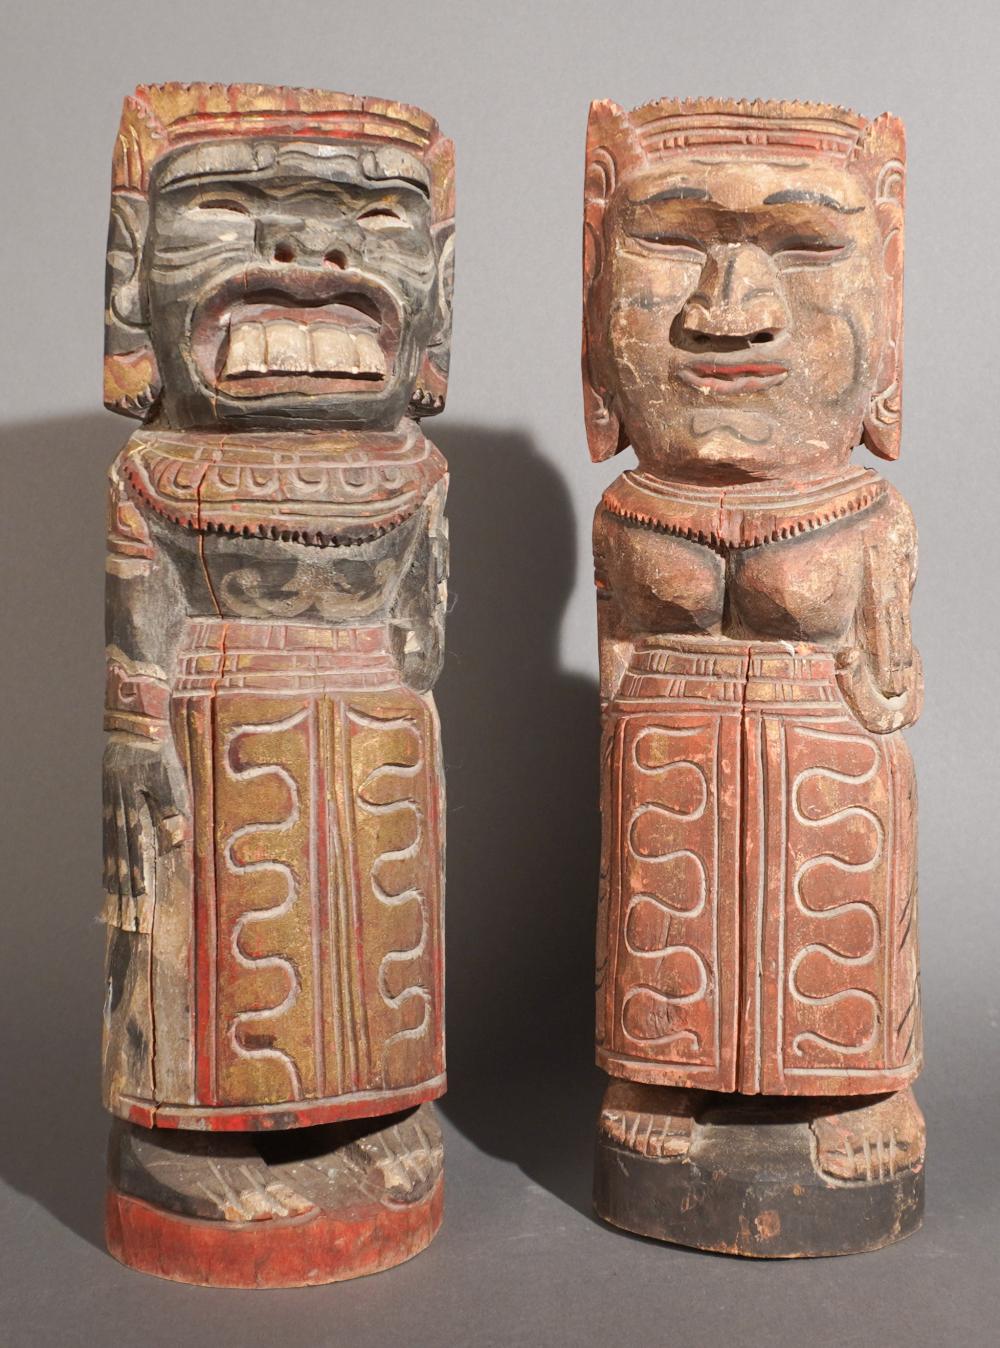 TWO PACIFIC ISLANDER CARVED AND 309d7e